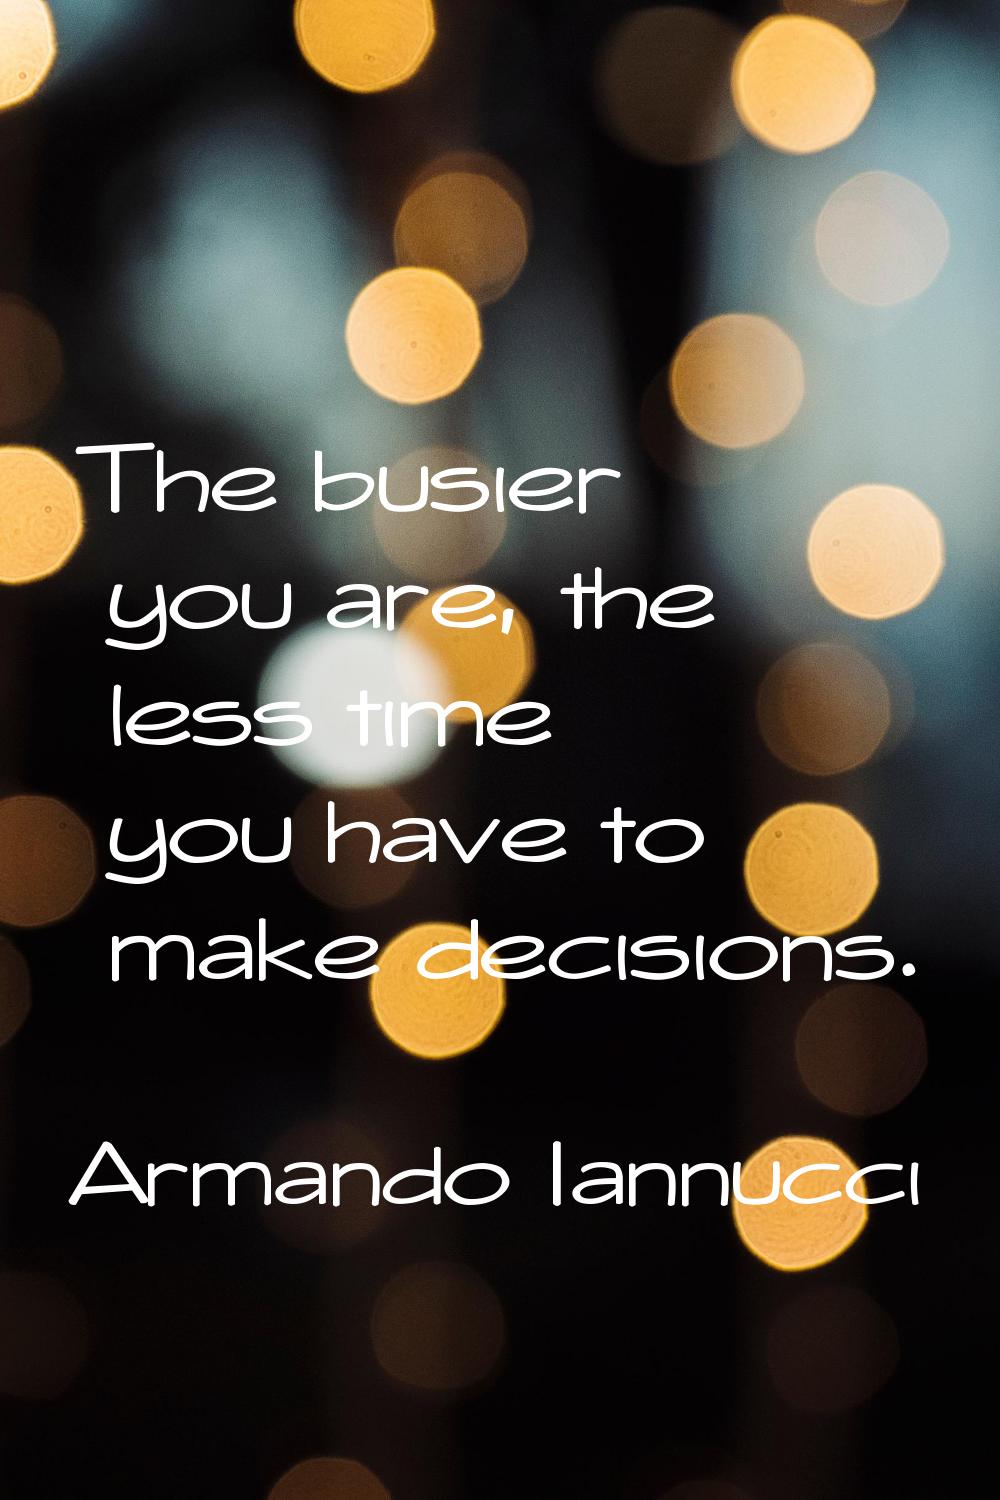 The busier you are, the less time you have to make decisions.